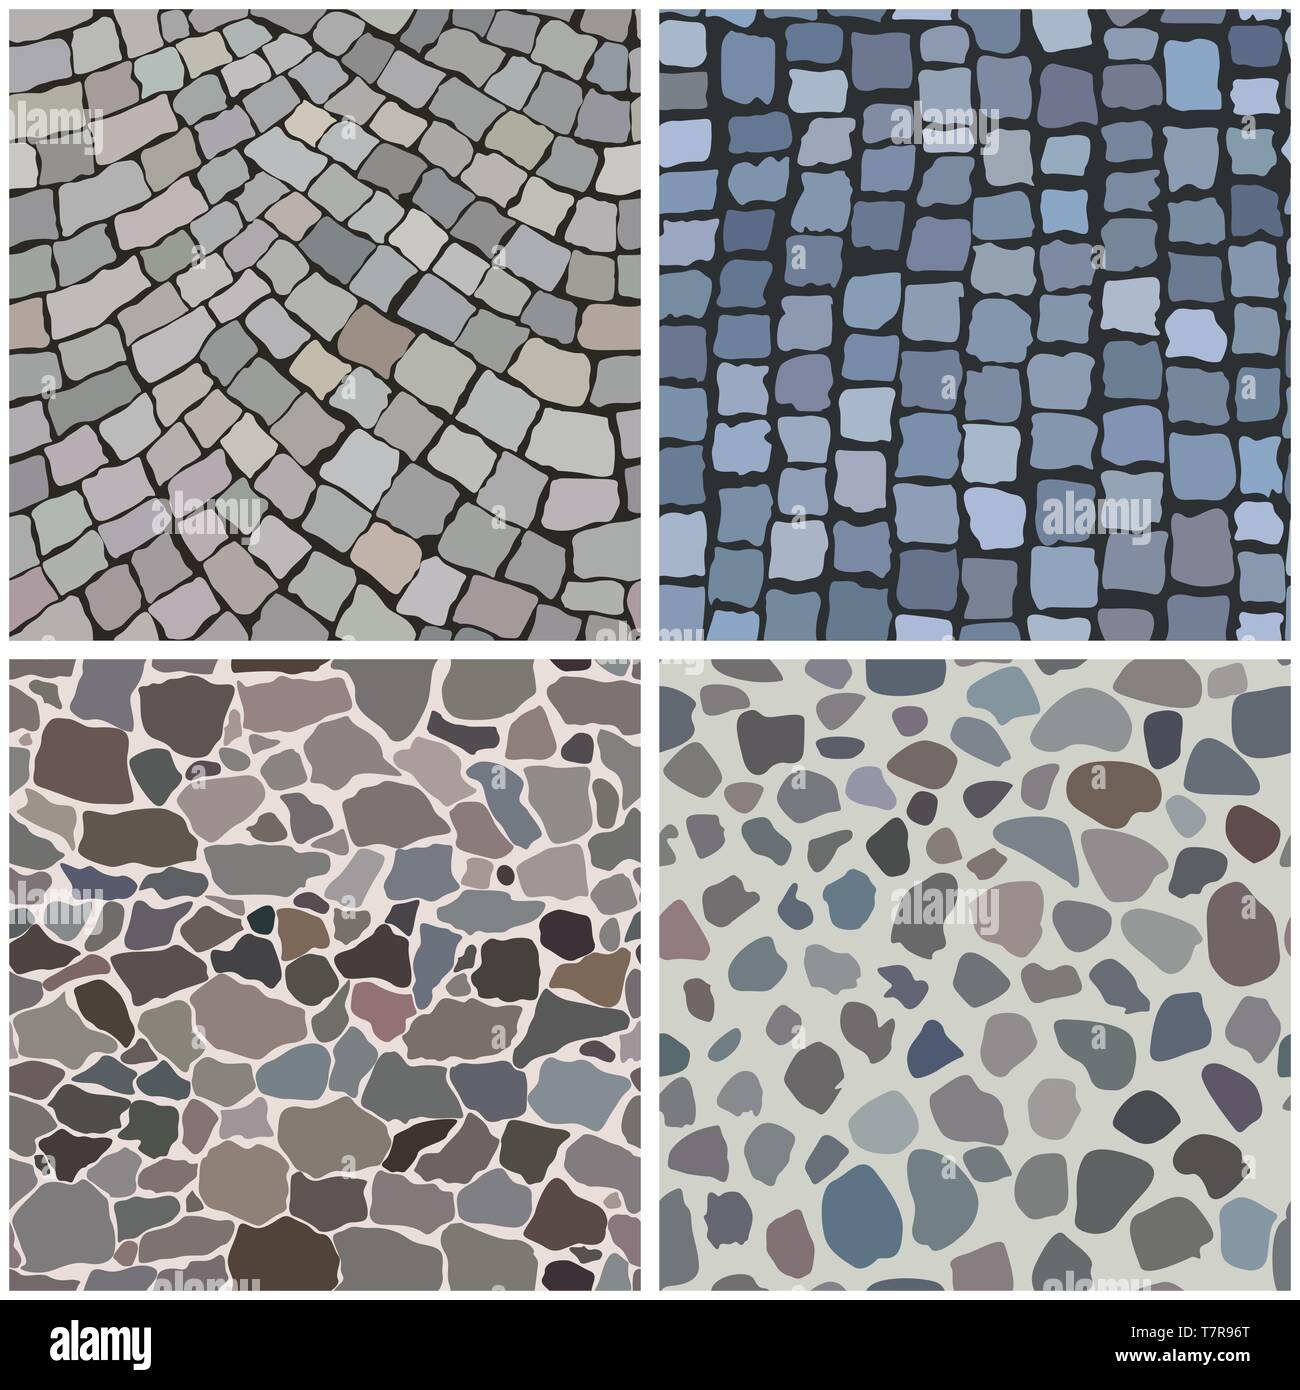 Seamless vector patterns of pavement stones Stock Vector